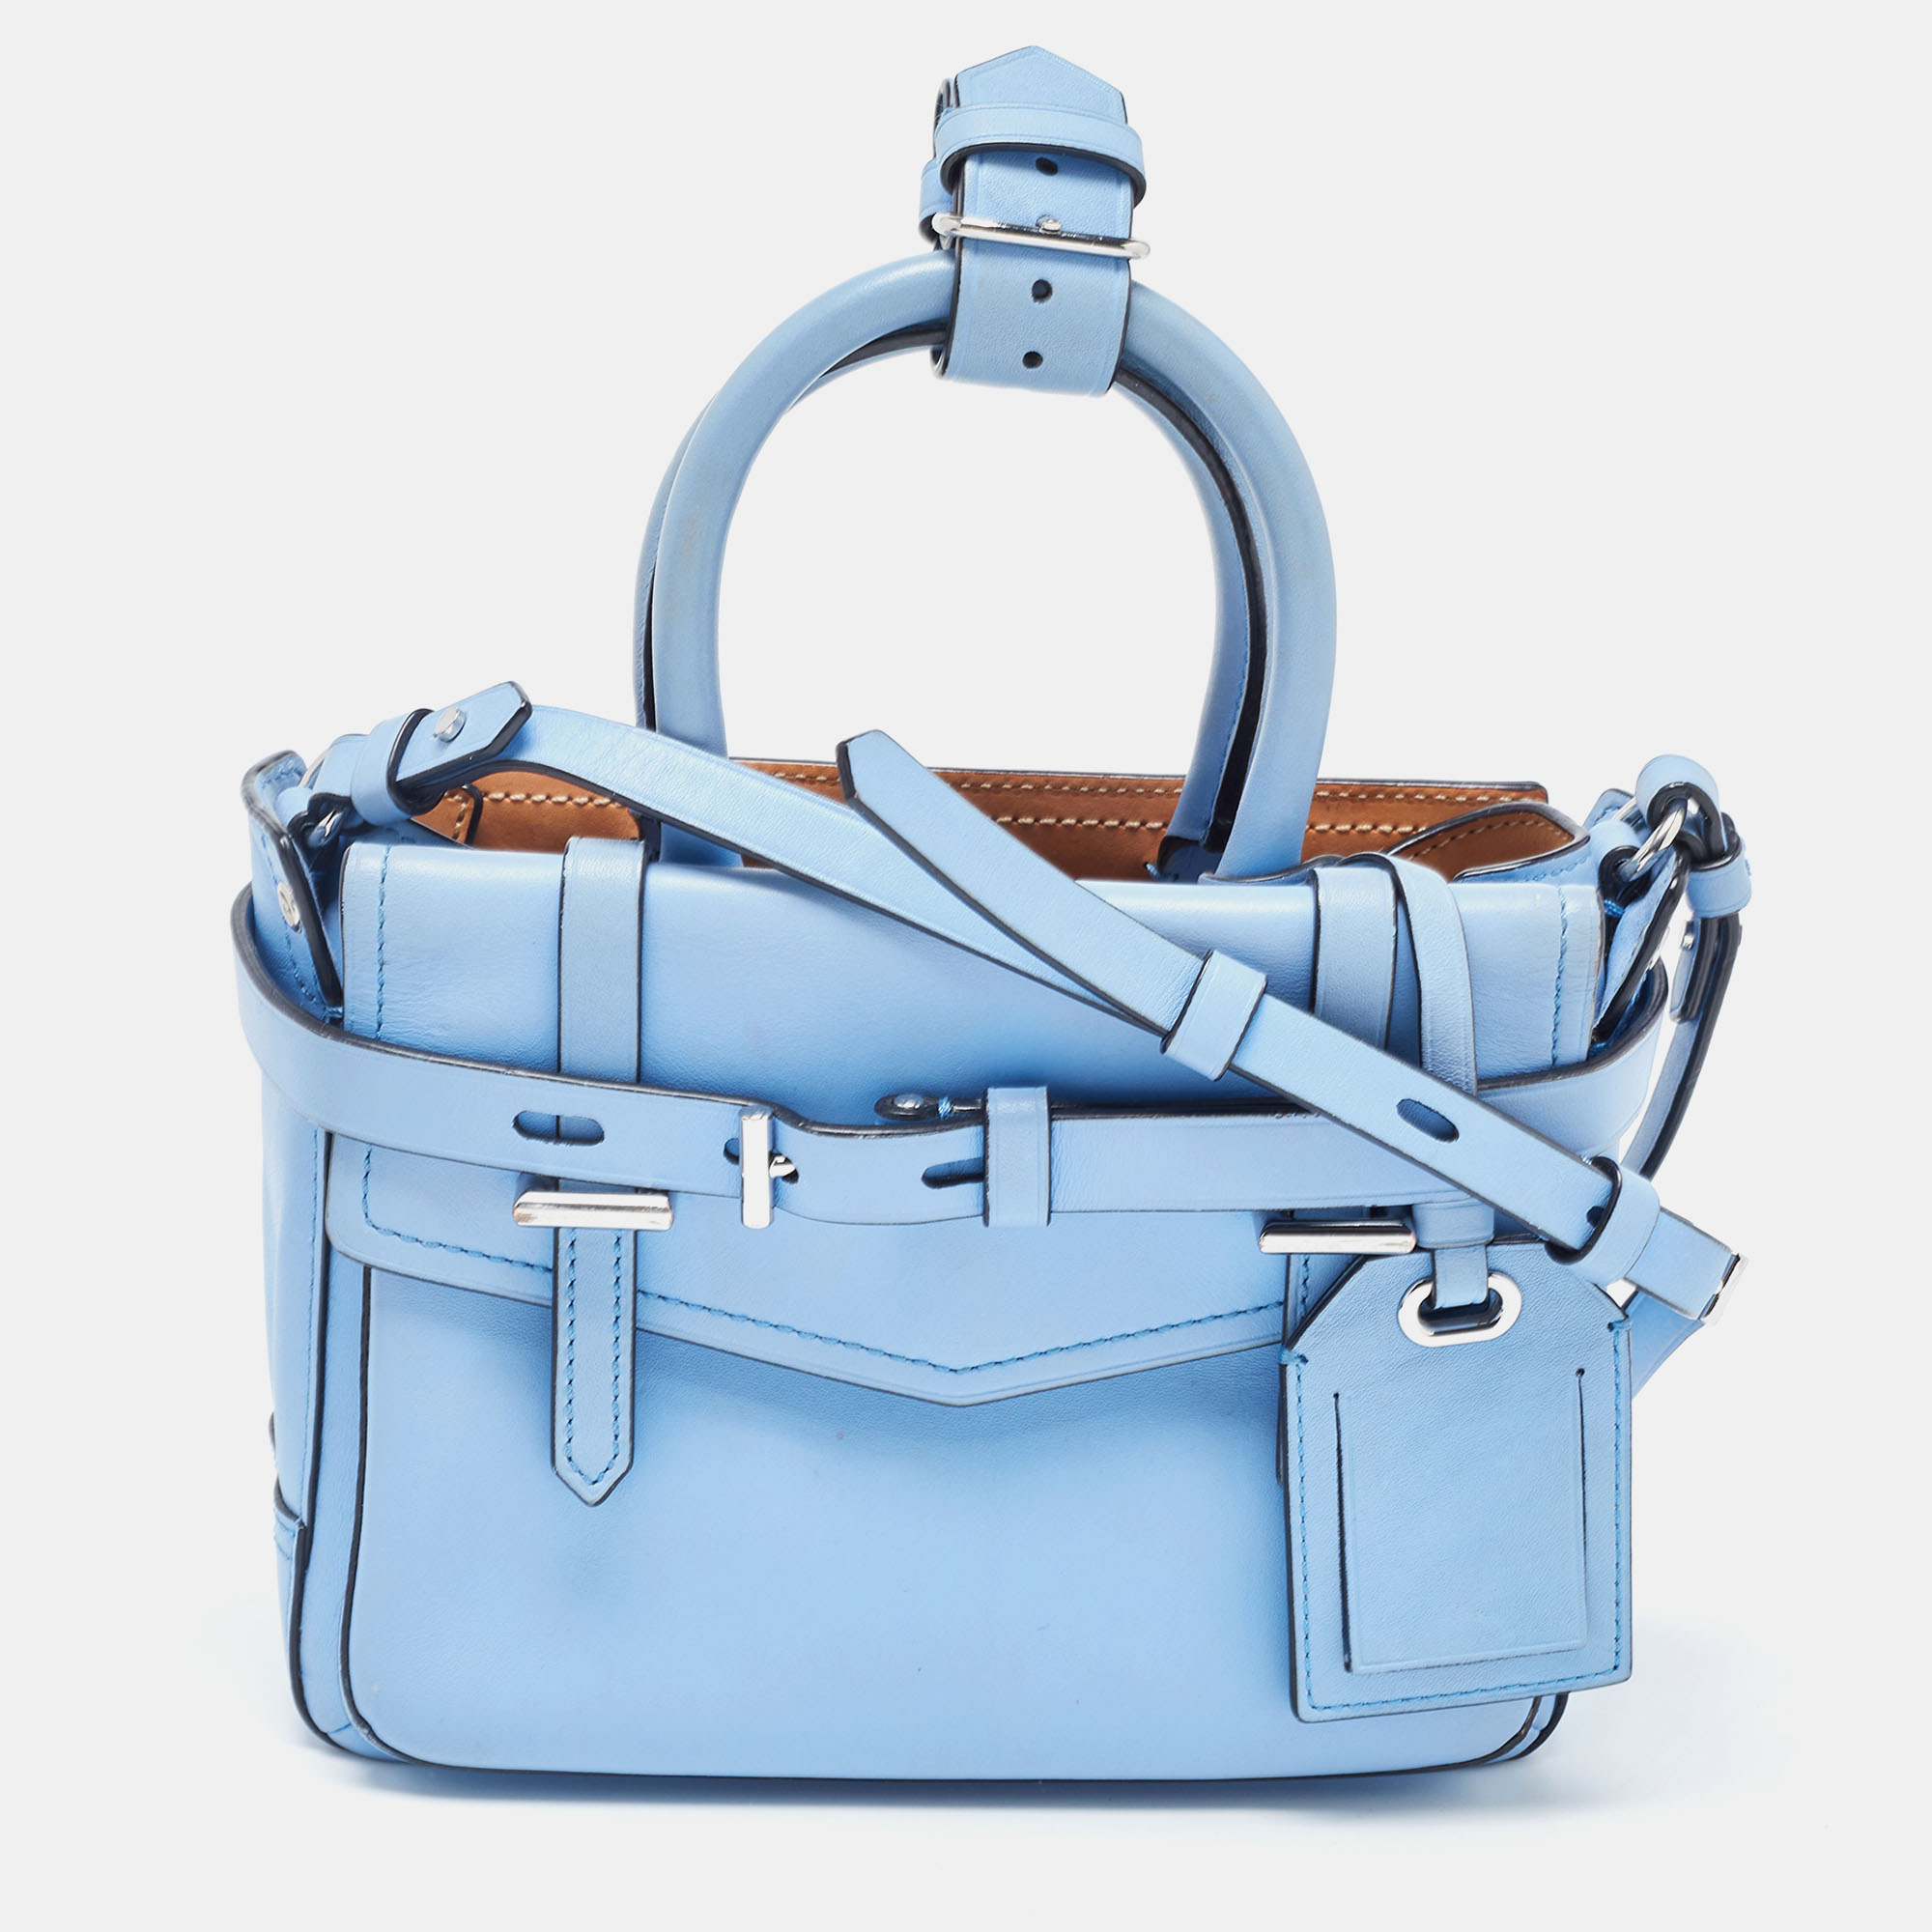 Reed Krakoff Blue Leather Micro Boxer Tote